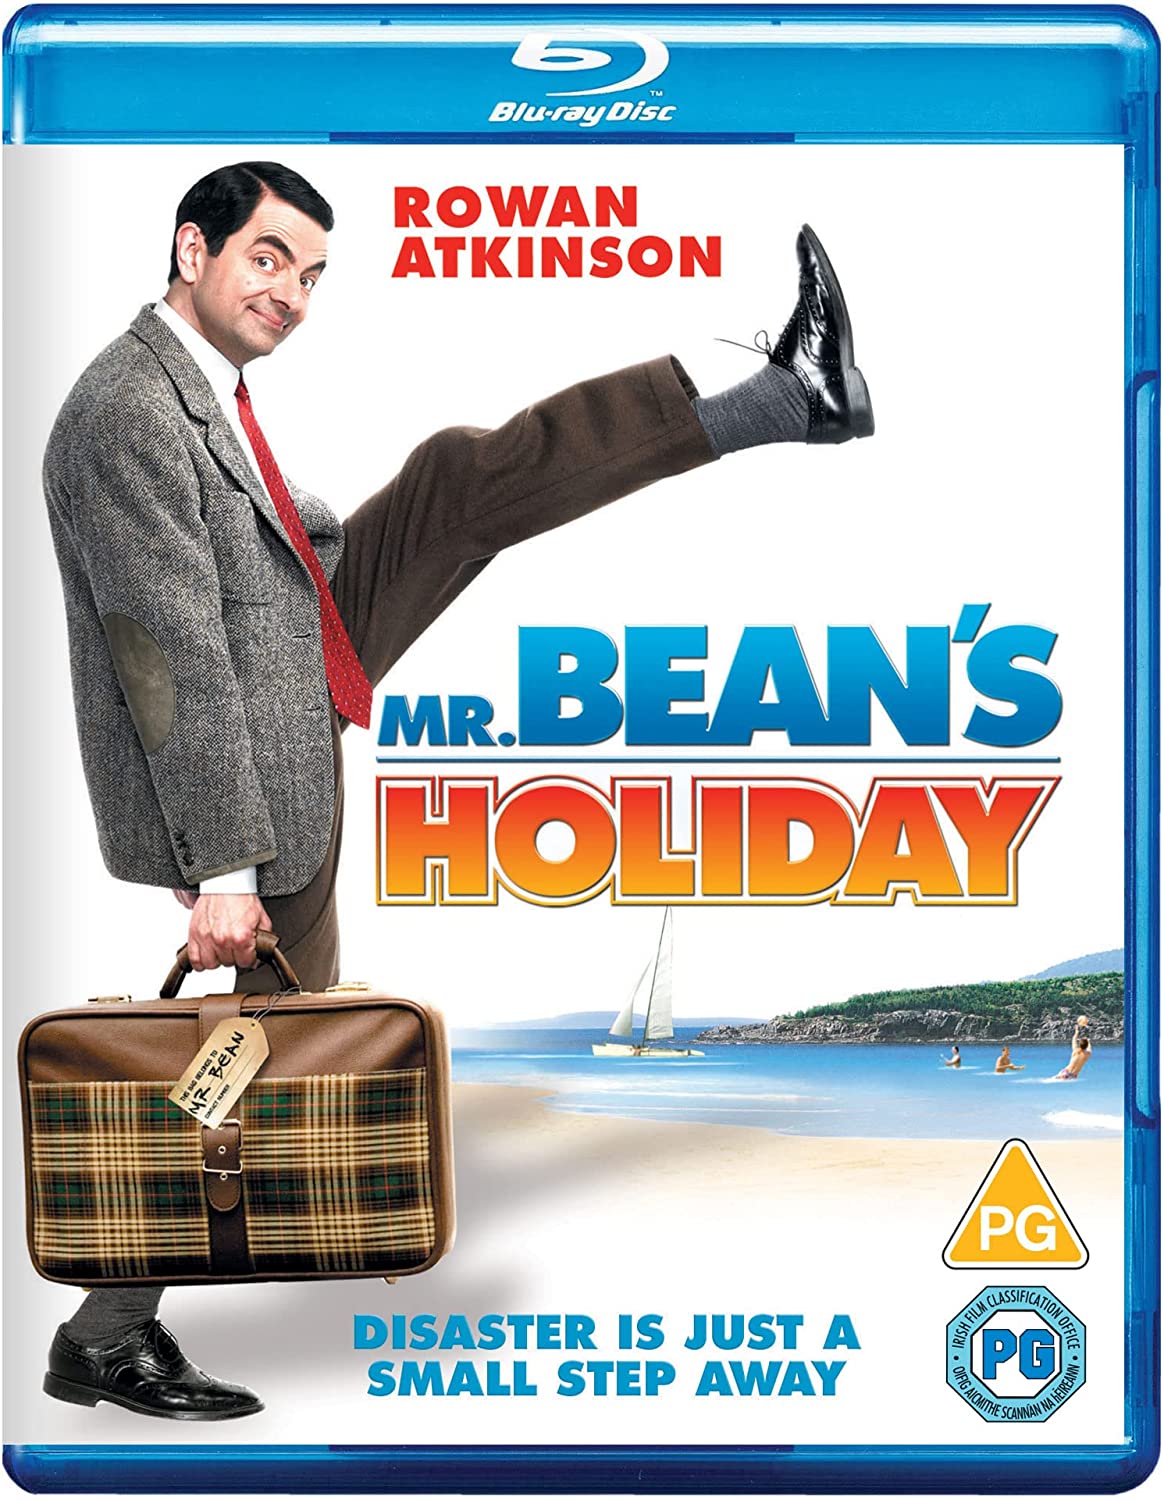 boom competitions -  win Mr Bean's Holiday on Blu-ray